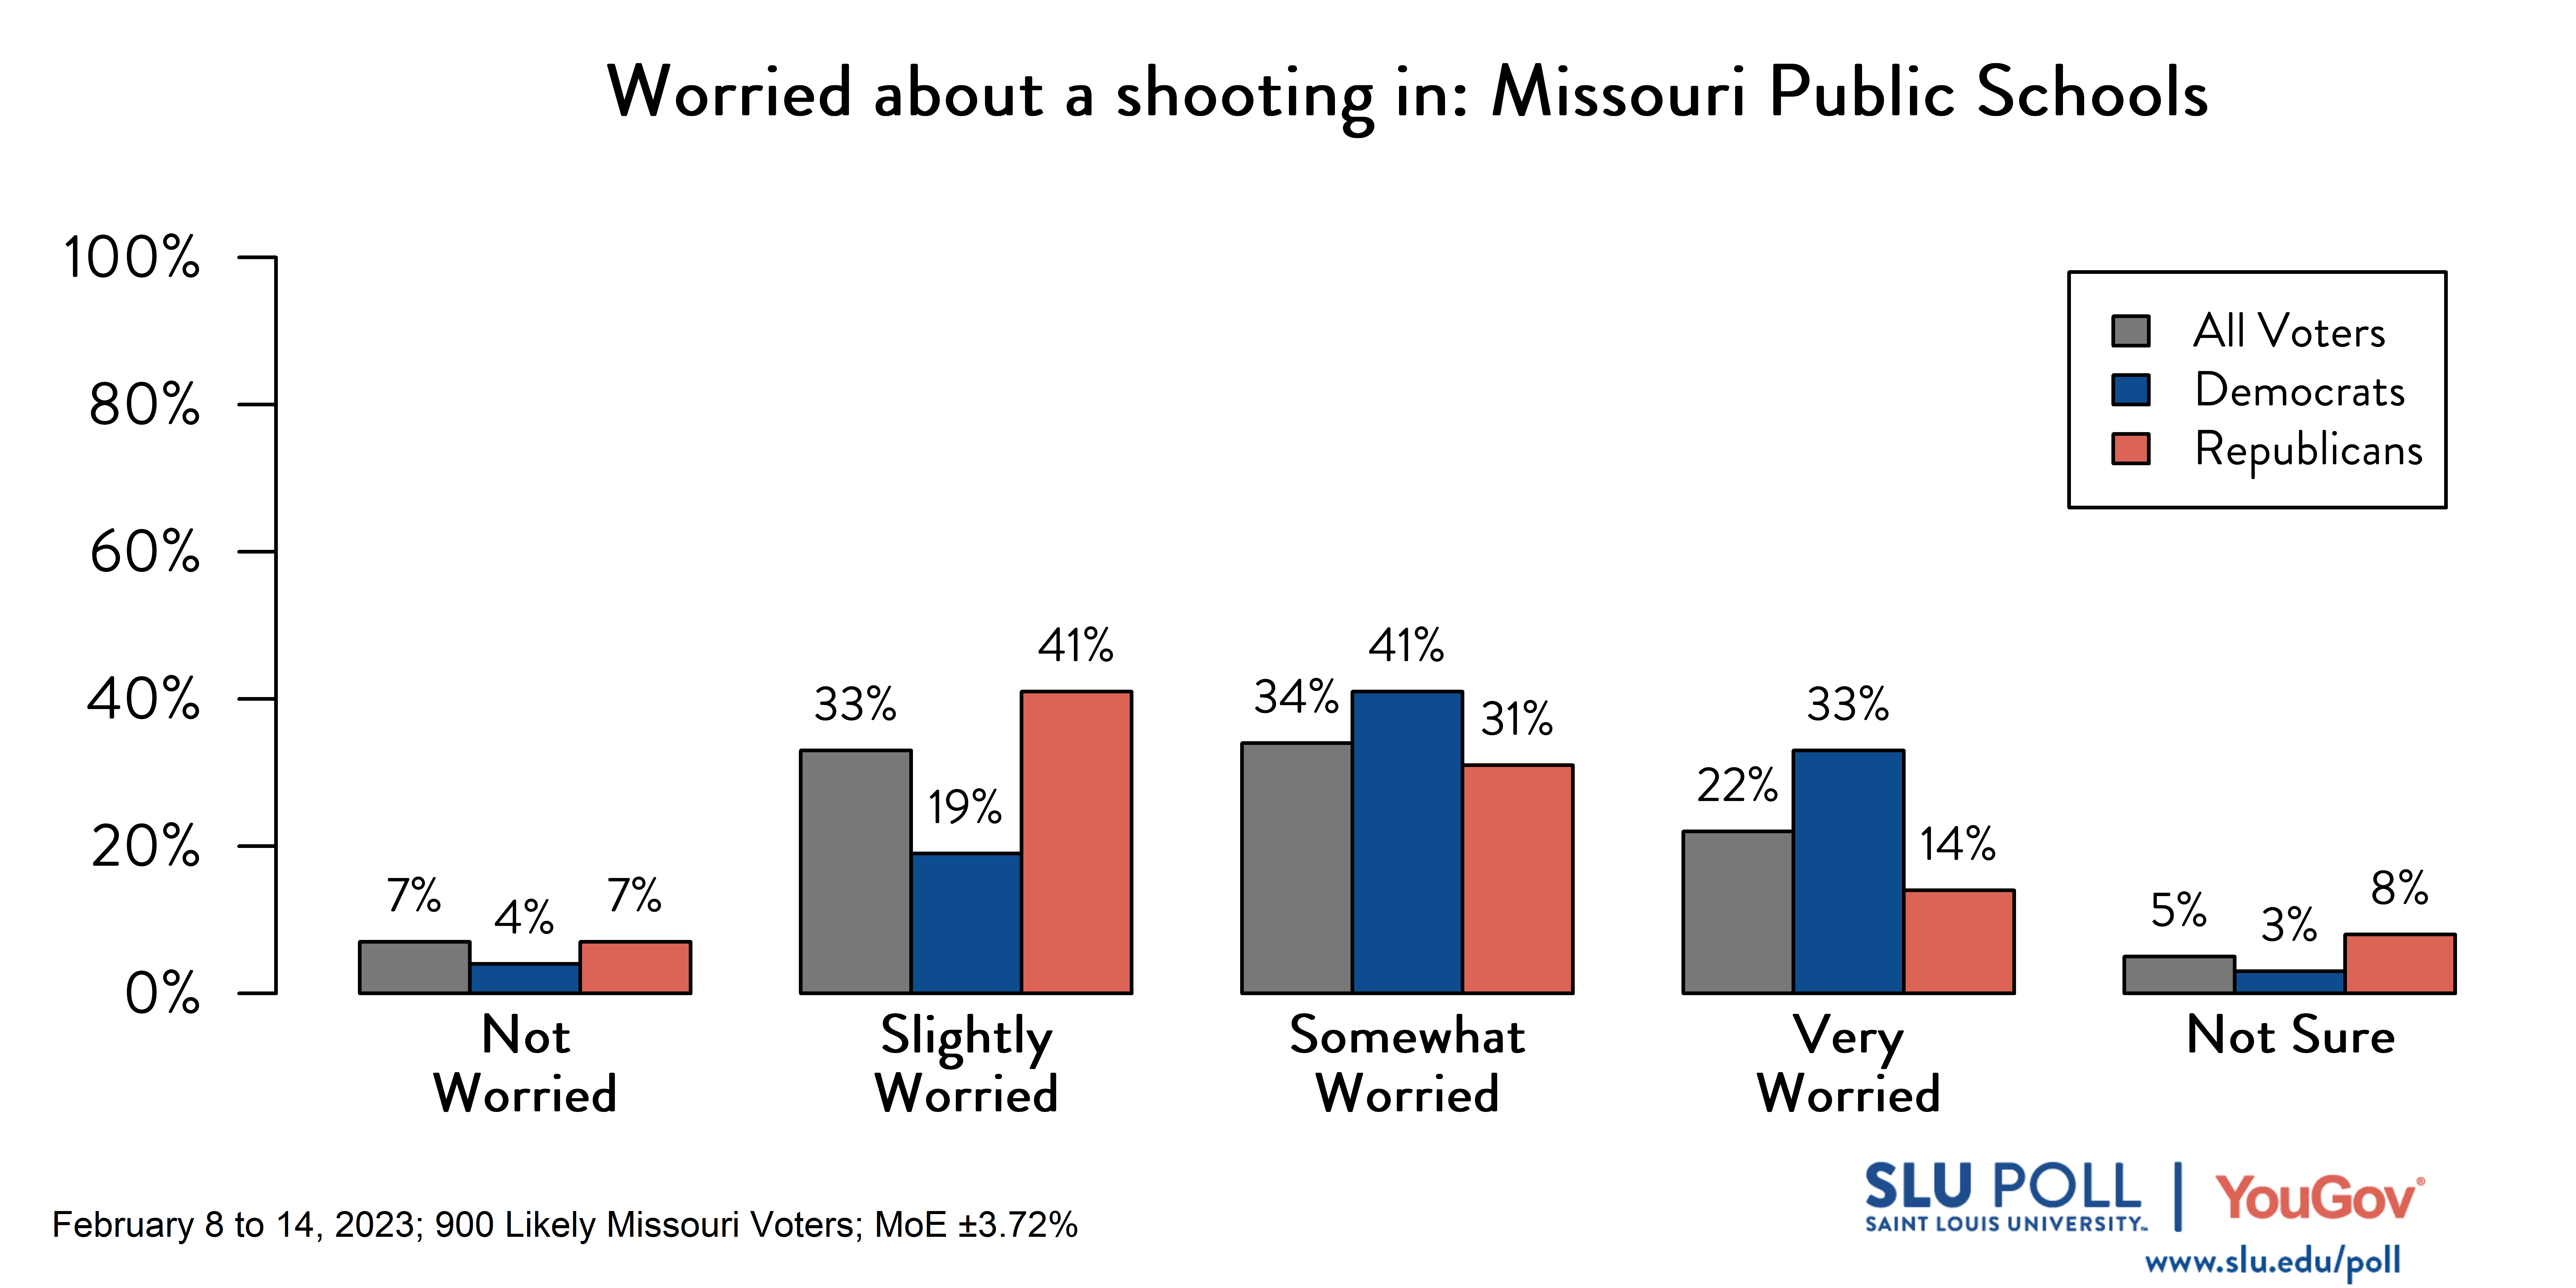 Likely voters' responses to 'How worried are you about the possibility of a shooting ever happening: in public schools across Missouri?': 7% Not worried, 33% Slightly worried, 34% Somewhat worried, 22% Very worried, and 5% Not sure. Democratic voters' responses: ' 4% Not worried, 19% Slightly worried, 41% Somewhat worried, 33% Very worried, and 3% Not sure. Republican voters' responses: 7% Not worried, 41% Slightly worried, 31% Somewhat worried, 14% Very worried, and 8% Not sure.